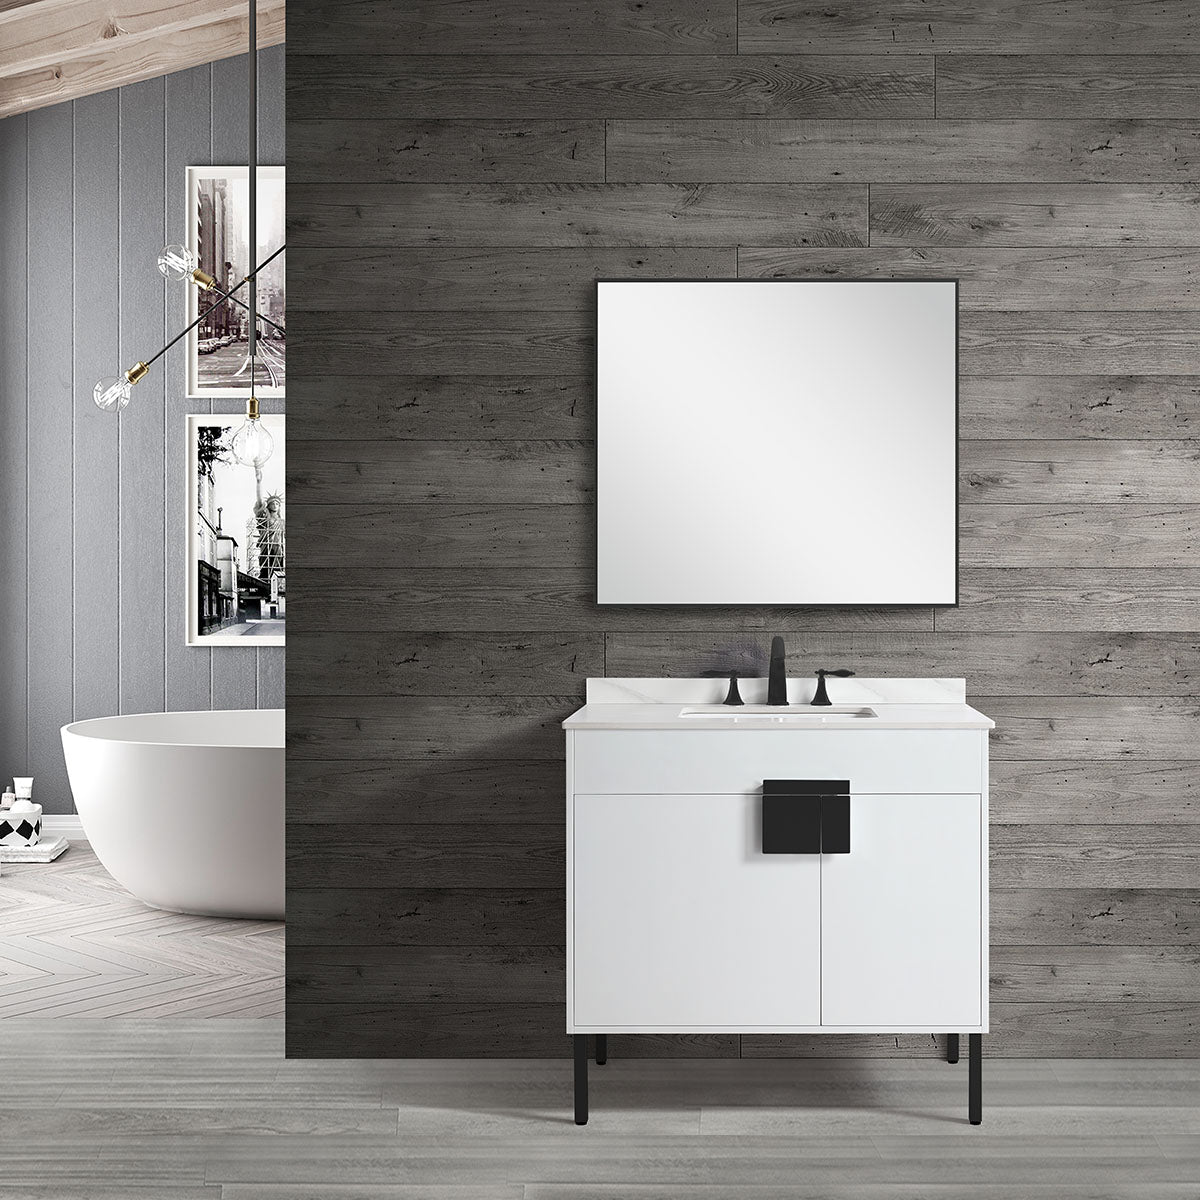 36" V9003 Series Vanity with Sintered Stone Countertop (Glossy White  ）